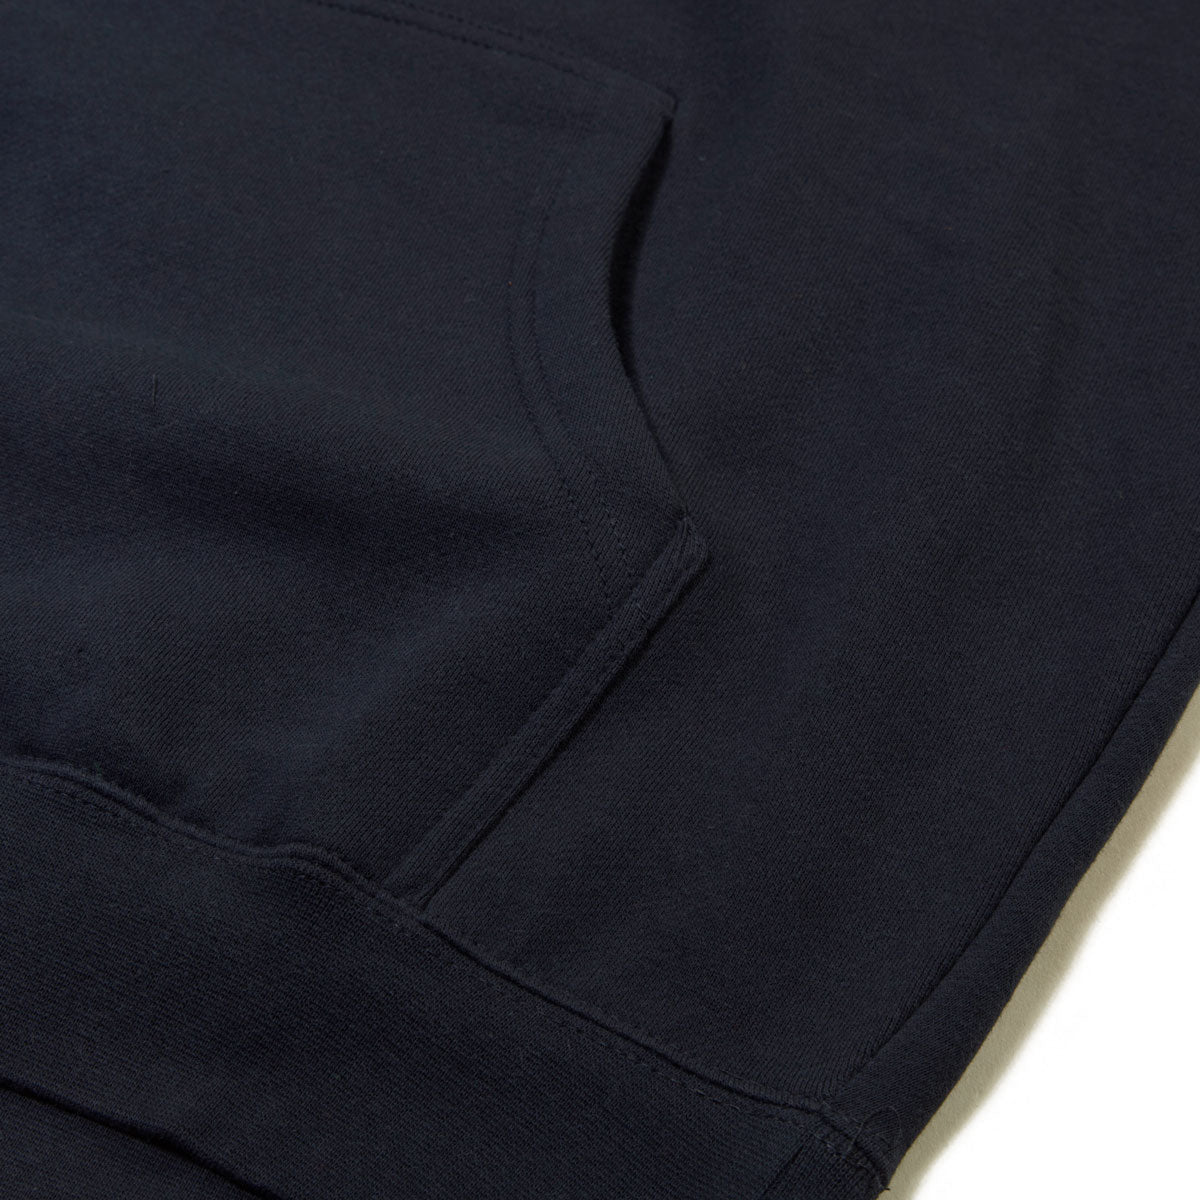 CCS Staple Pullover Hoodie - Navy image 3